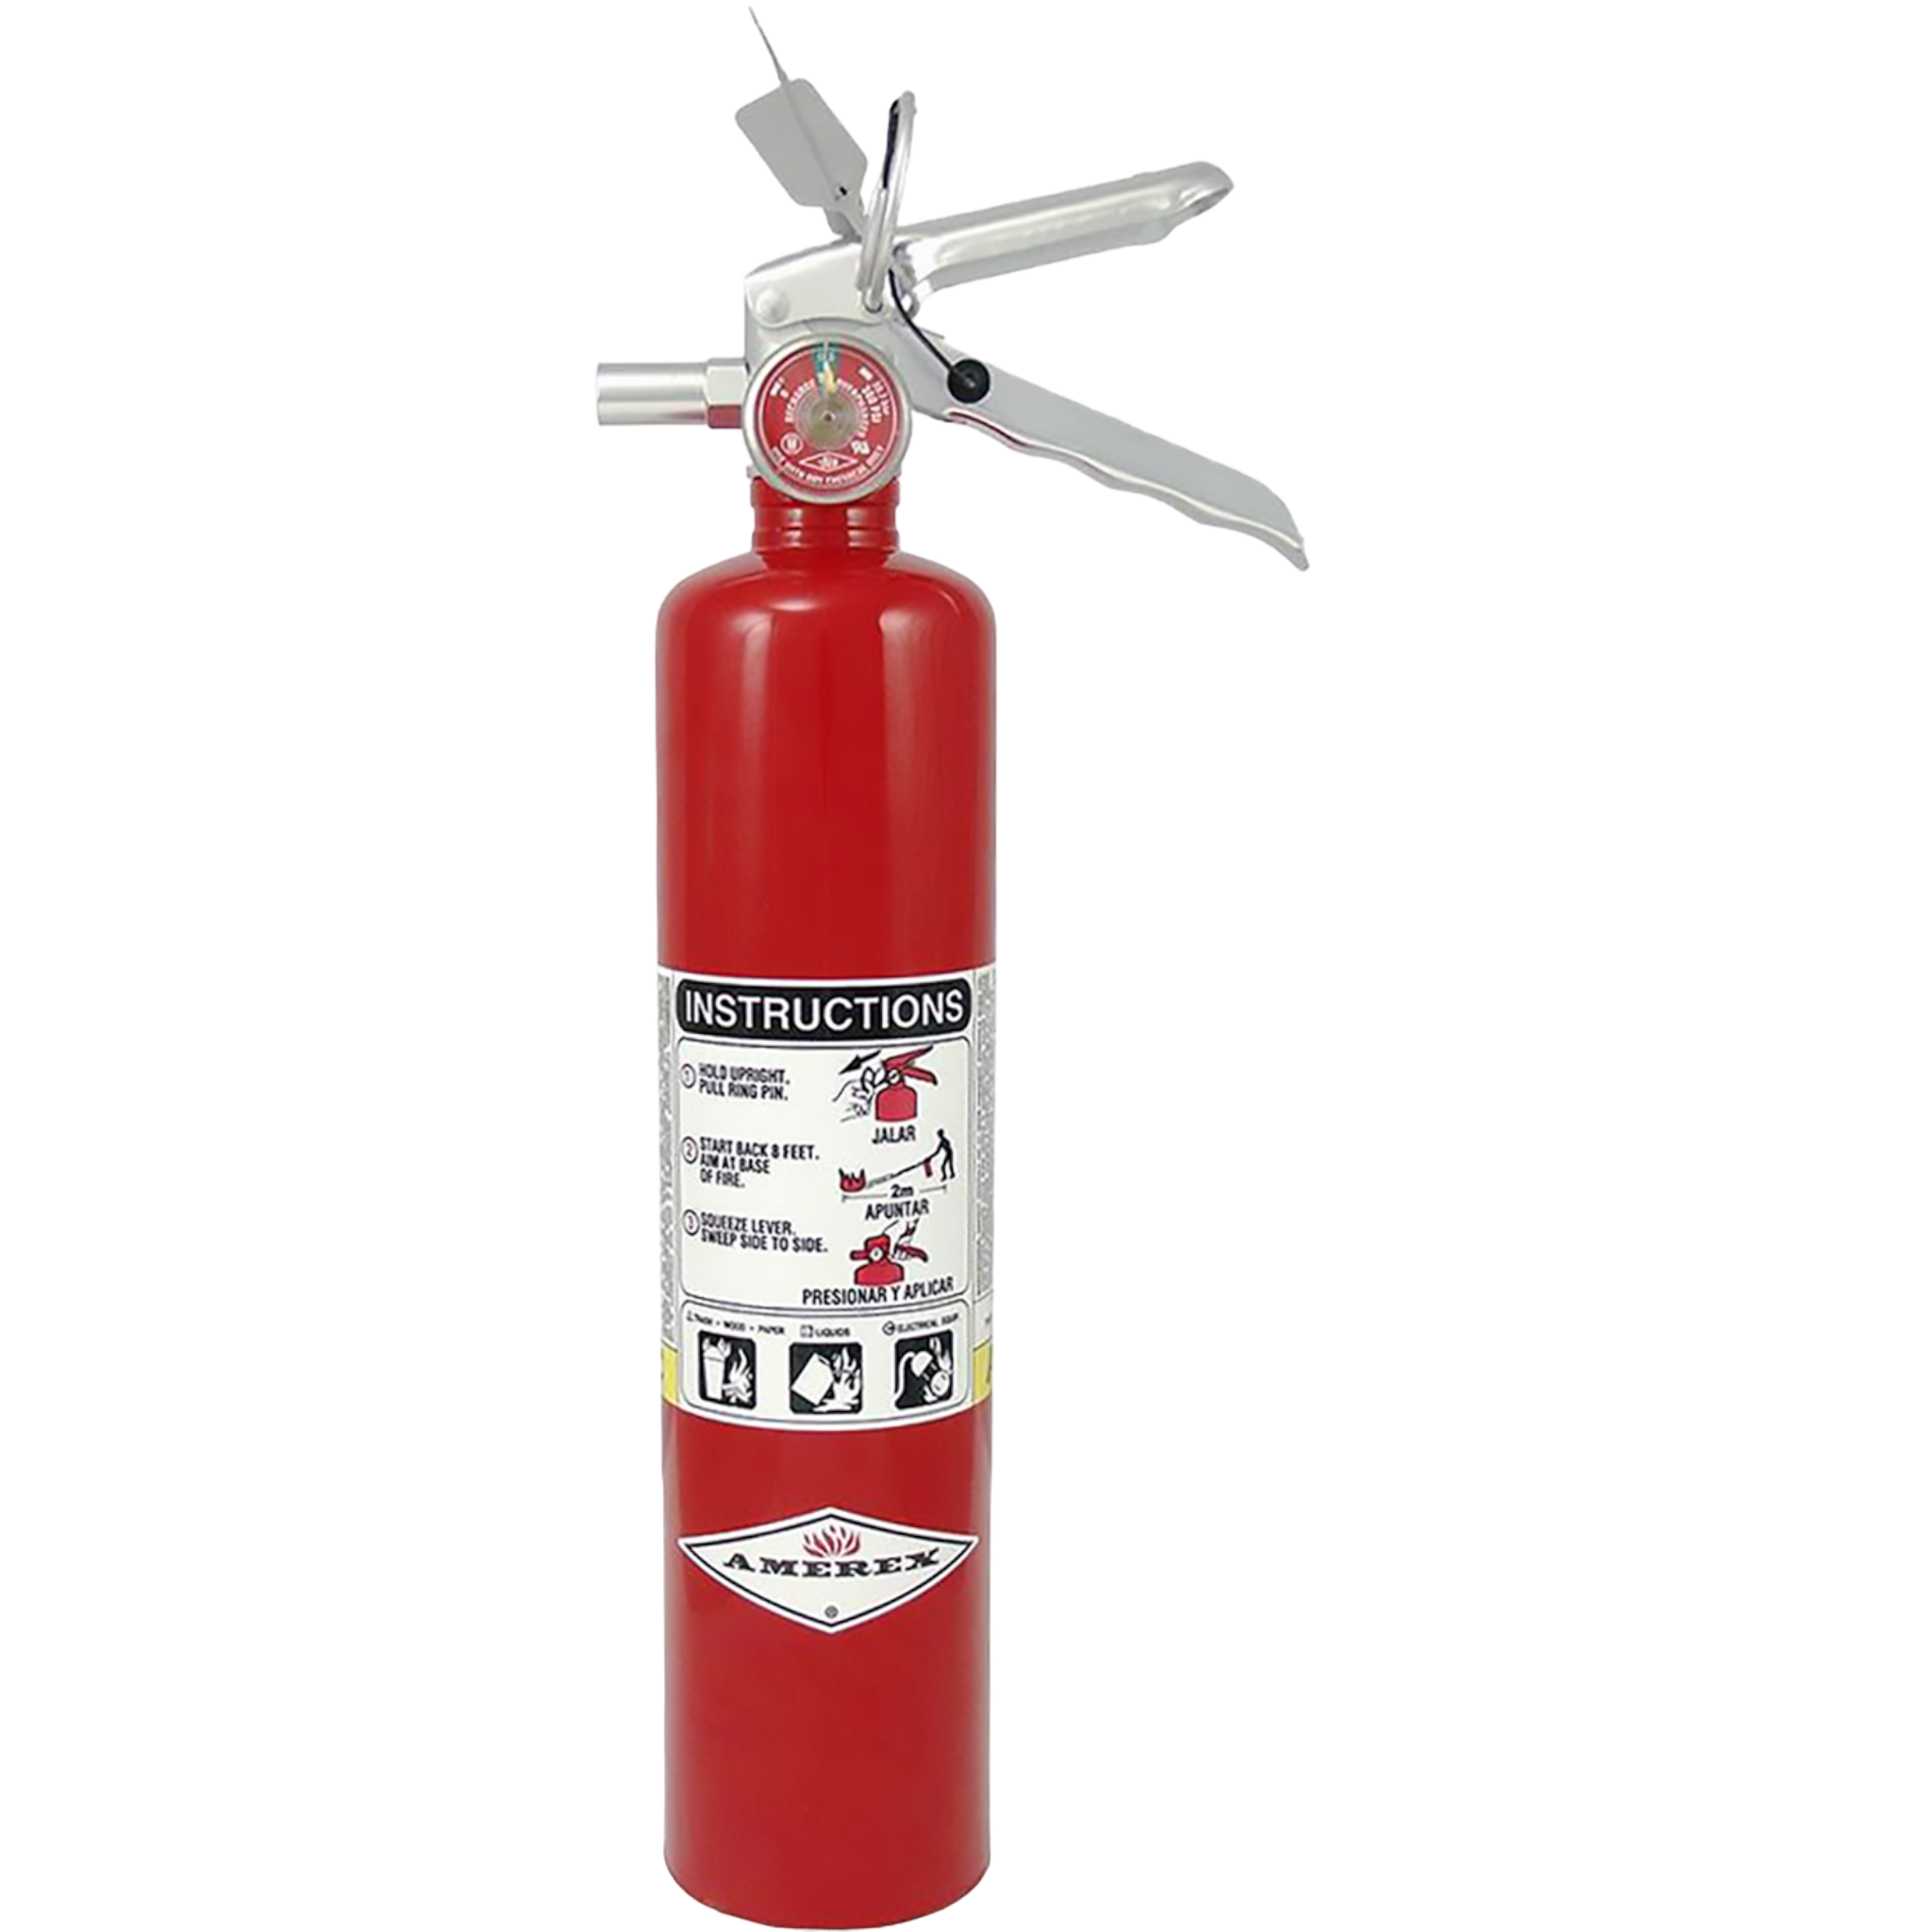 Amerex Dry Chemical Fire Extinguisher - B417T - 2.5 Pounds - Pro-Distributing